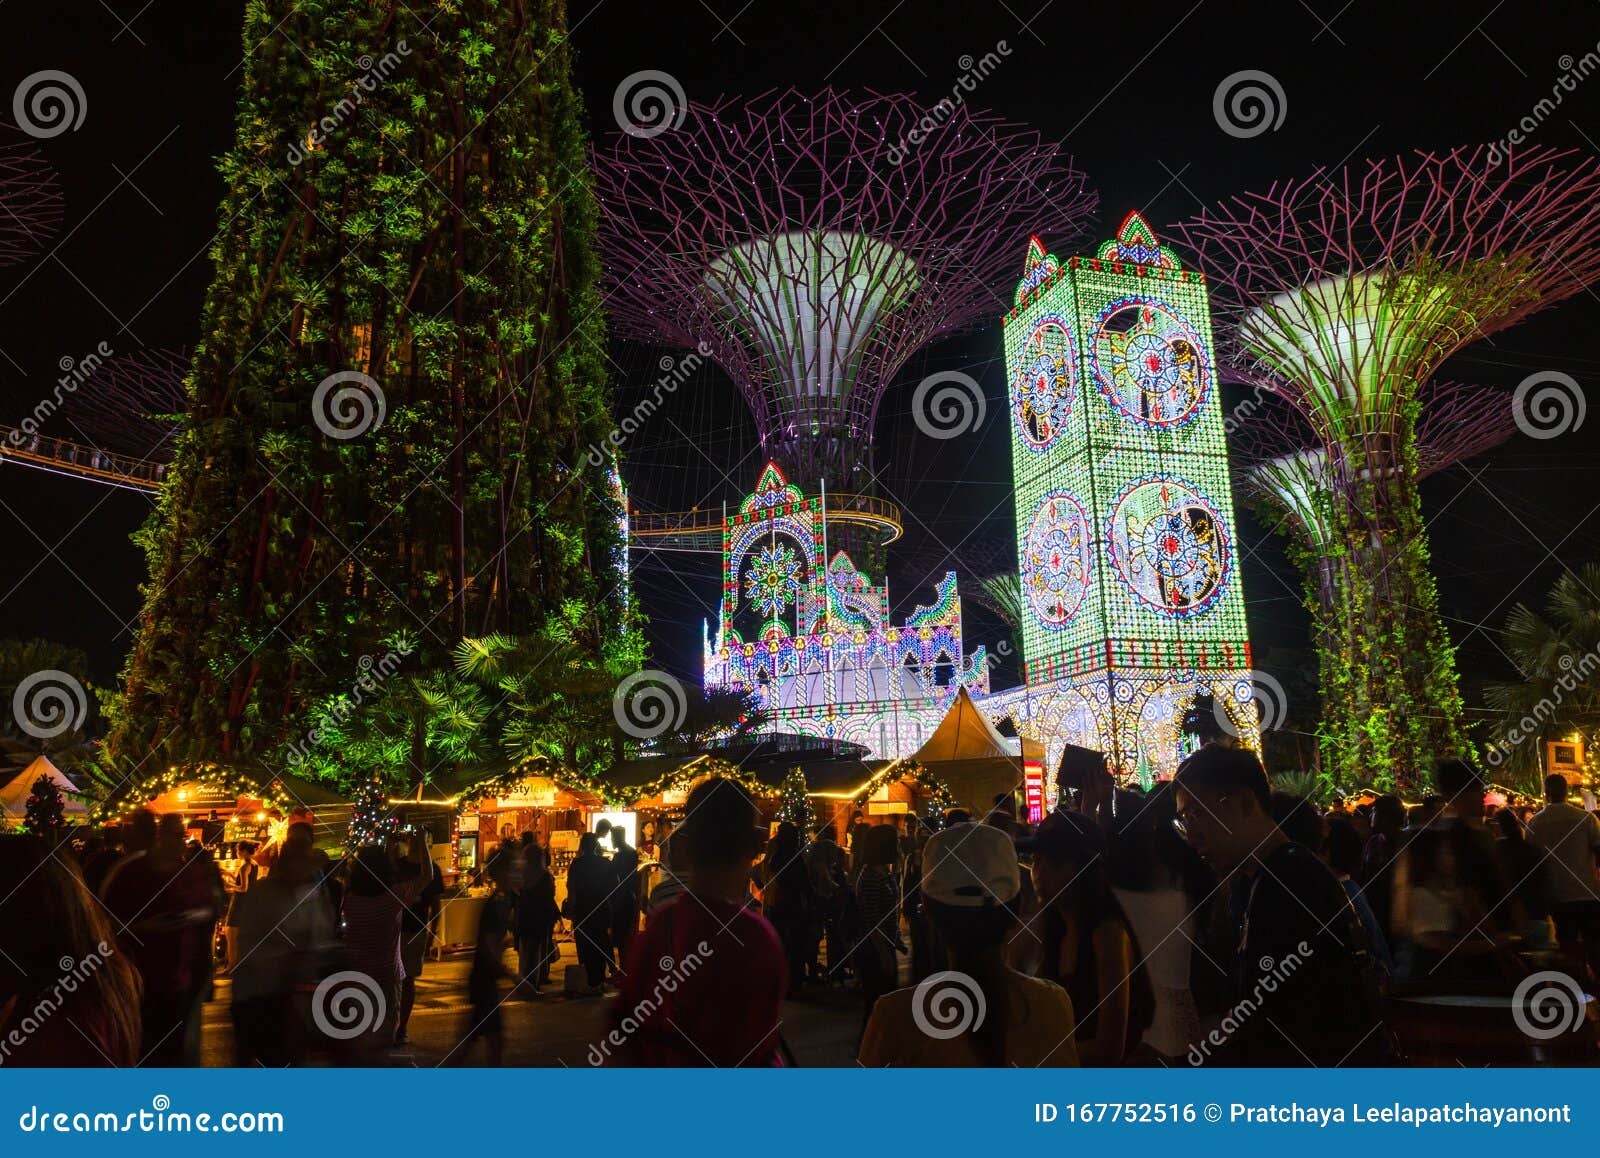 Lighting And Music Show With Supertree Of Christmas Wonderland Festival At Gardens By The Bay In Singapore Popular Tourist Attrac Stock Photo Image Of Christmas Landmark